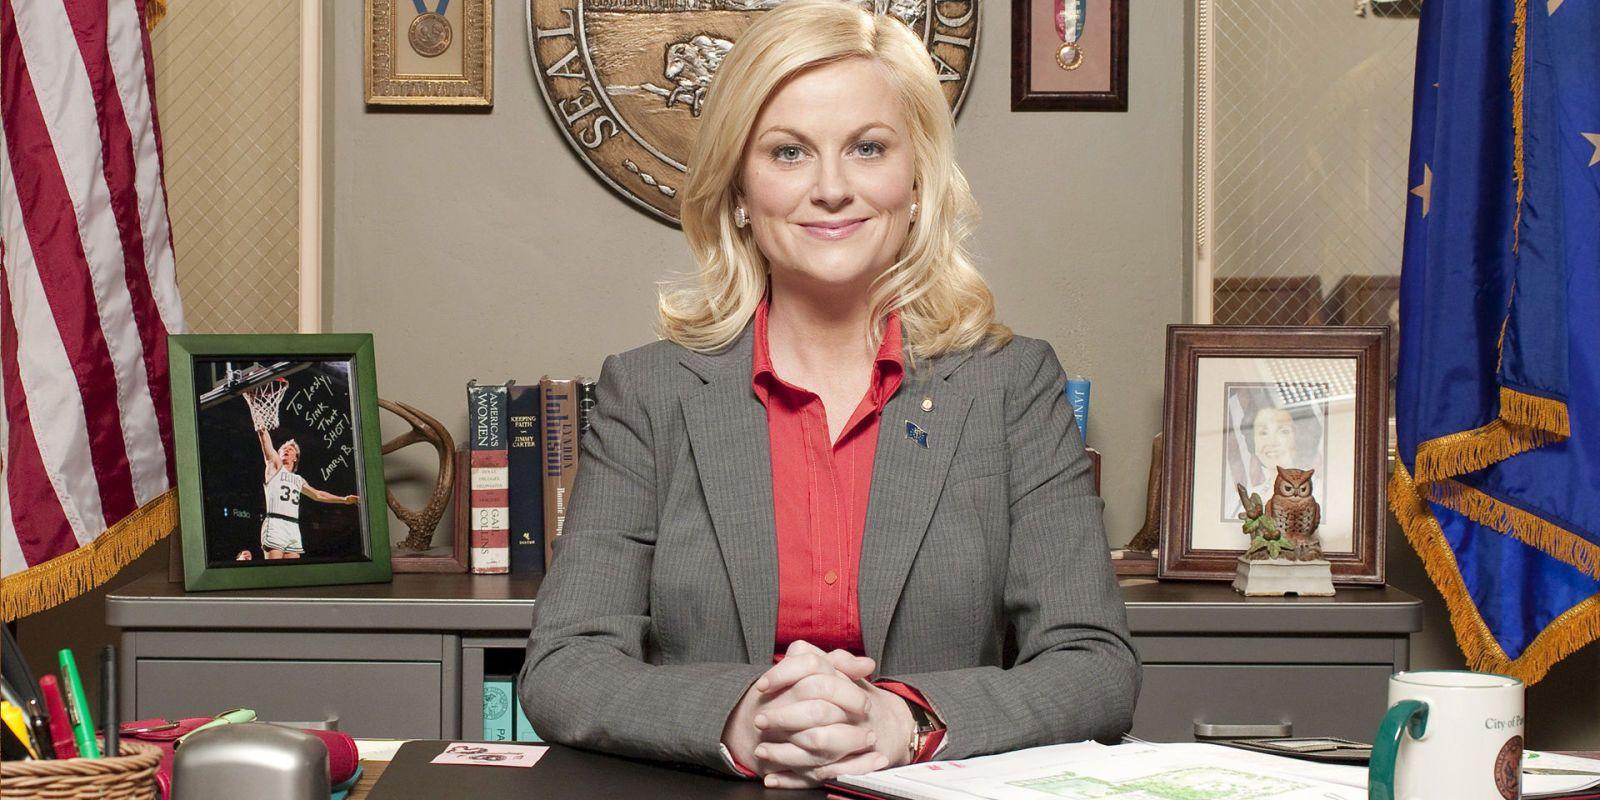 Parks and Recreation's Leslie Knope is back to comfort you with